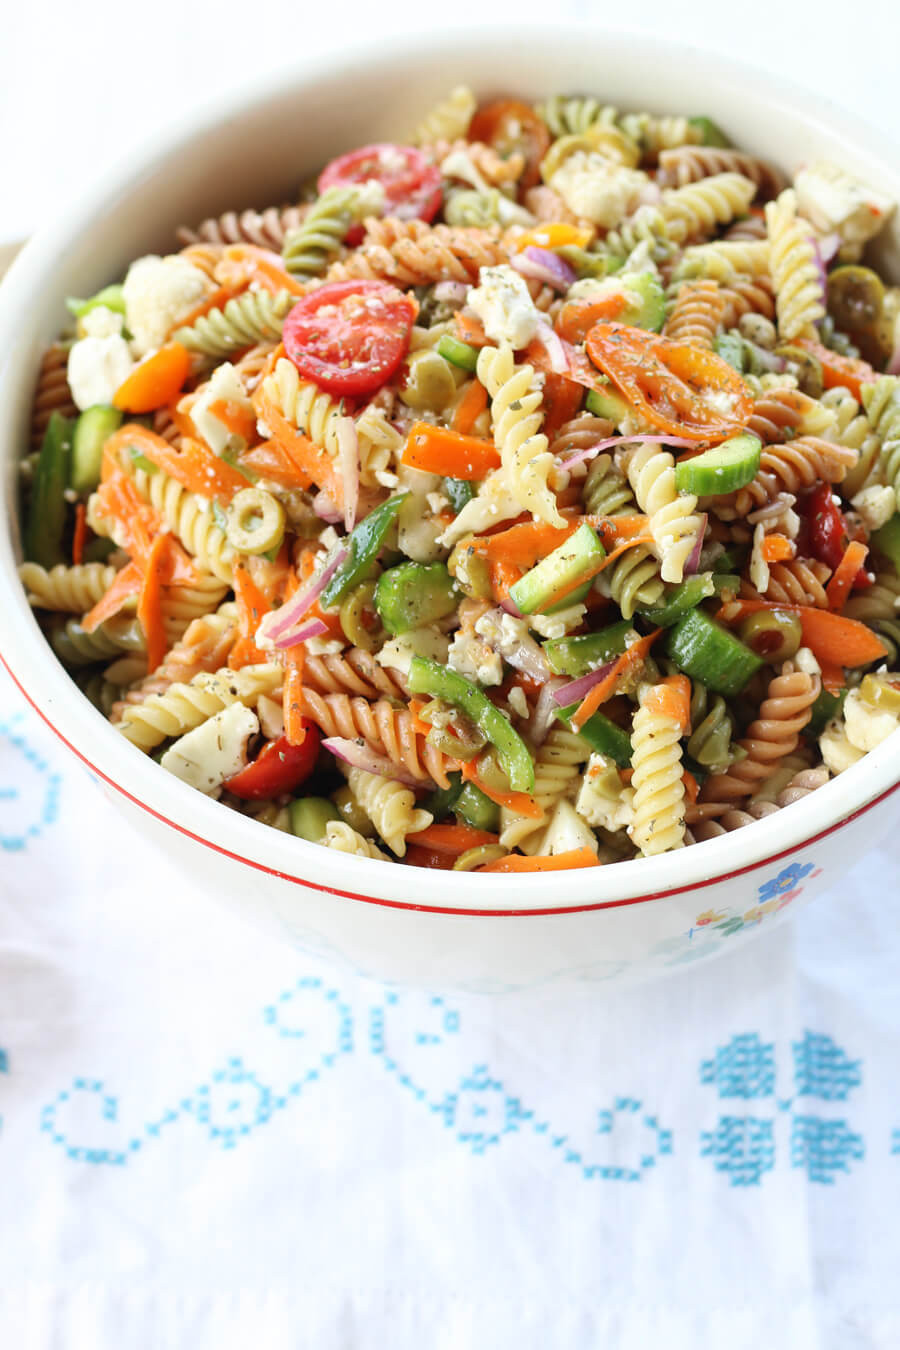 Pasta Salad With Italian Dressing And Cucumbers
 The Best Zesty Italian Pasta Salad